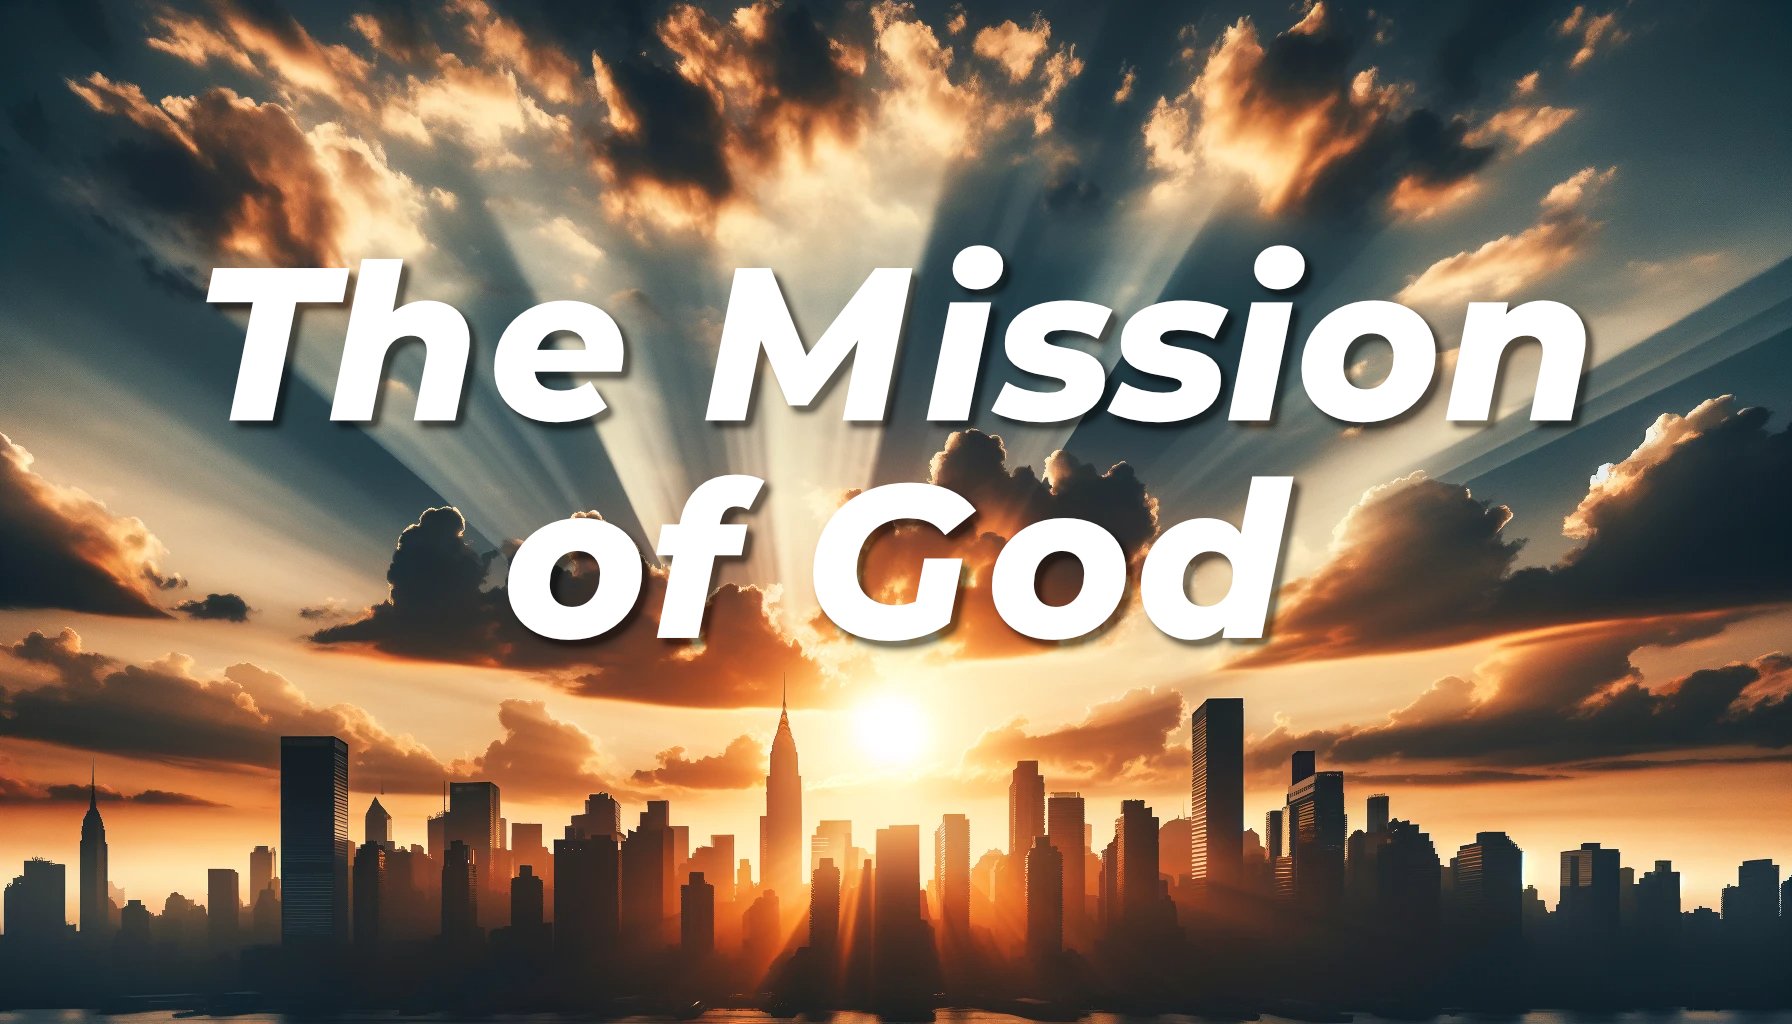 The Mission of God - Ad.jpg